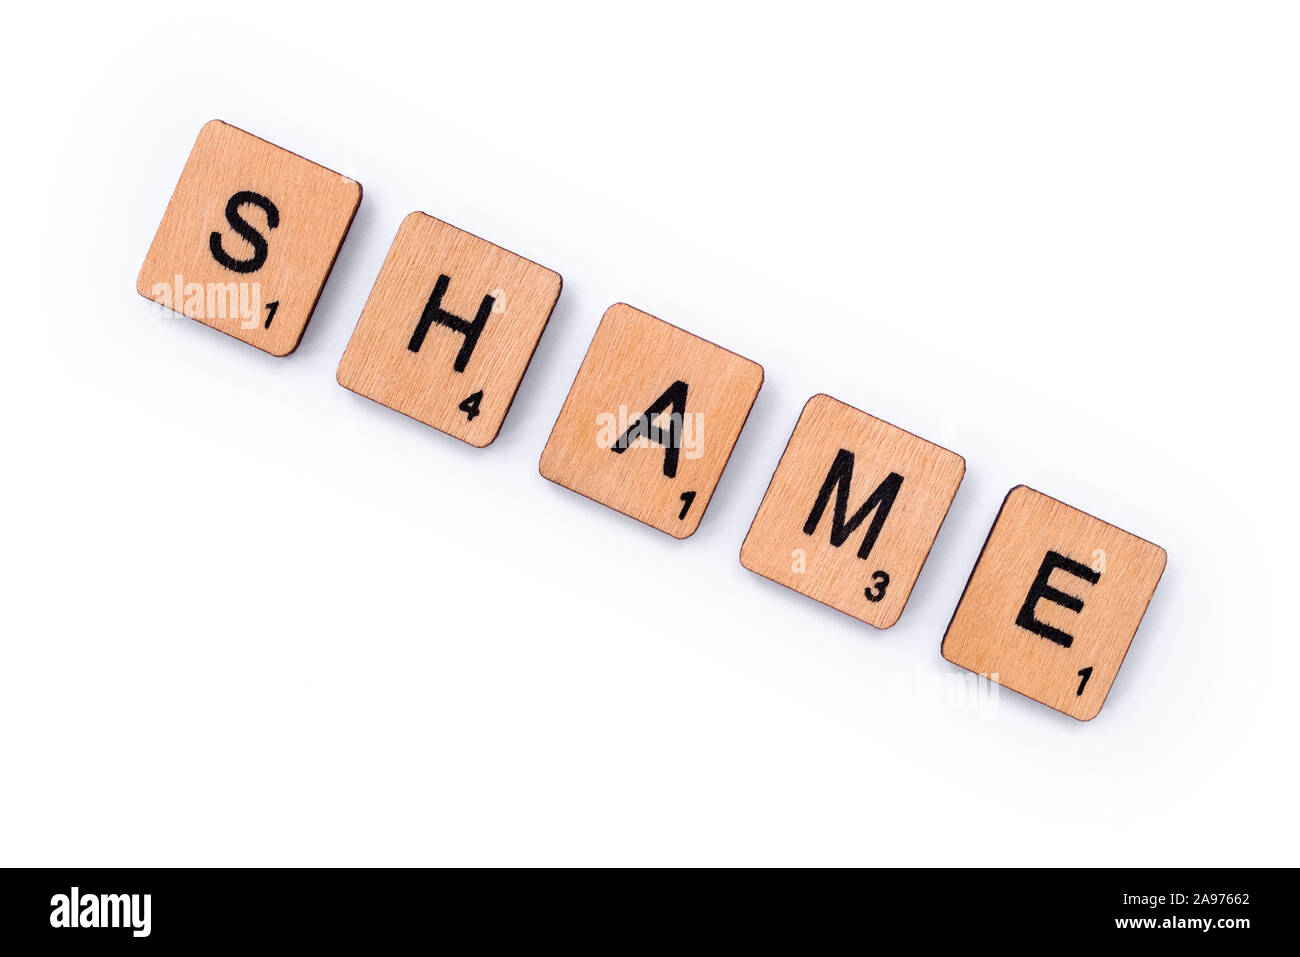 London, UK - July 8th 2019: The word SHAME, spelt with wooden letter tiles over a white background. Stock Photo